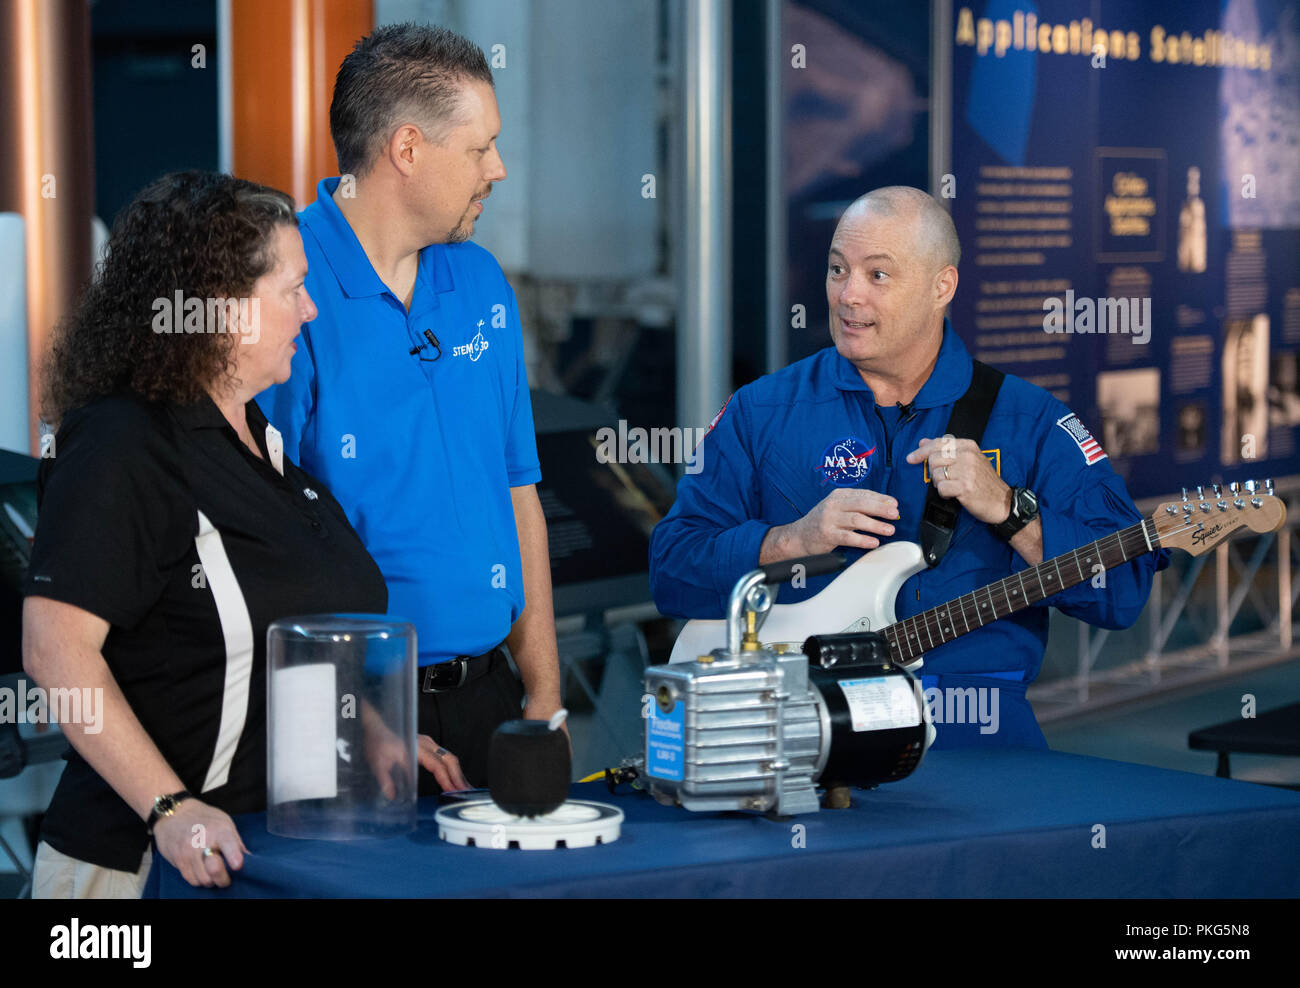 Chantilly, VA, USA. 12th Sep, 2018. NASA astronaut Scott Tingle helps conduct an experiment about sound waves in a vacuum during a taping of STEM in 30 with Beth Wilson and Marty Kelsey, Wednesday, Sept. 12, 2018 at the Smithsonian National Air and Space Museum's Steven F. Udvar-Hazy Center in Chantilly, Va. Tingle spent 168 days onboard the International Space Station as part of Expeditions 54 and 55. Photo Credit: (NASA/Joel Kowsky) Wednesday, Sept. 12, 2018 at the Smithsonian National Air and Space Museum's Steven F. Udvar-Hazy Center in Chantilly, Va. Tingle spent 168 days onboard th Stock Photo